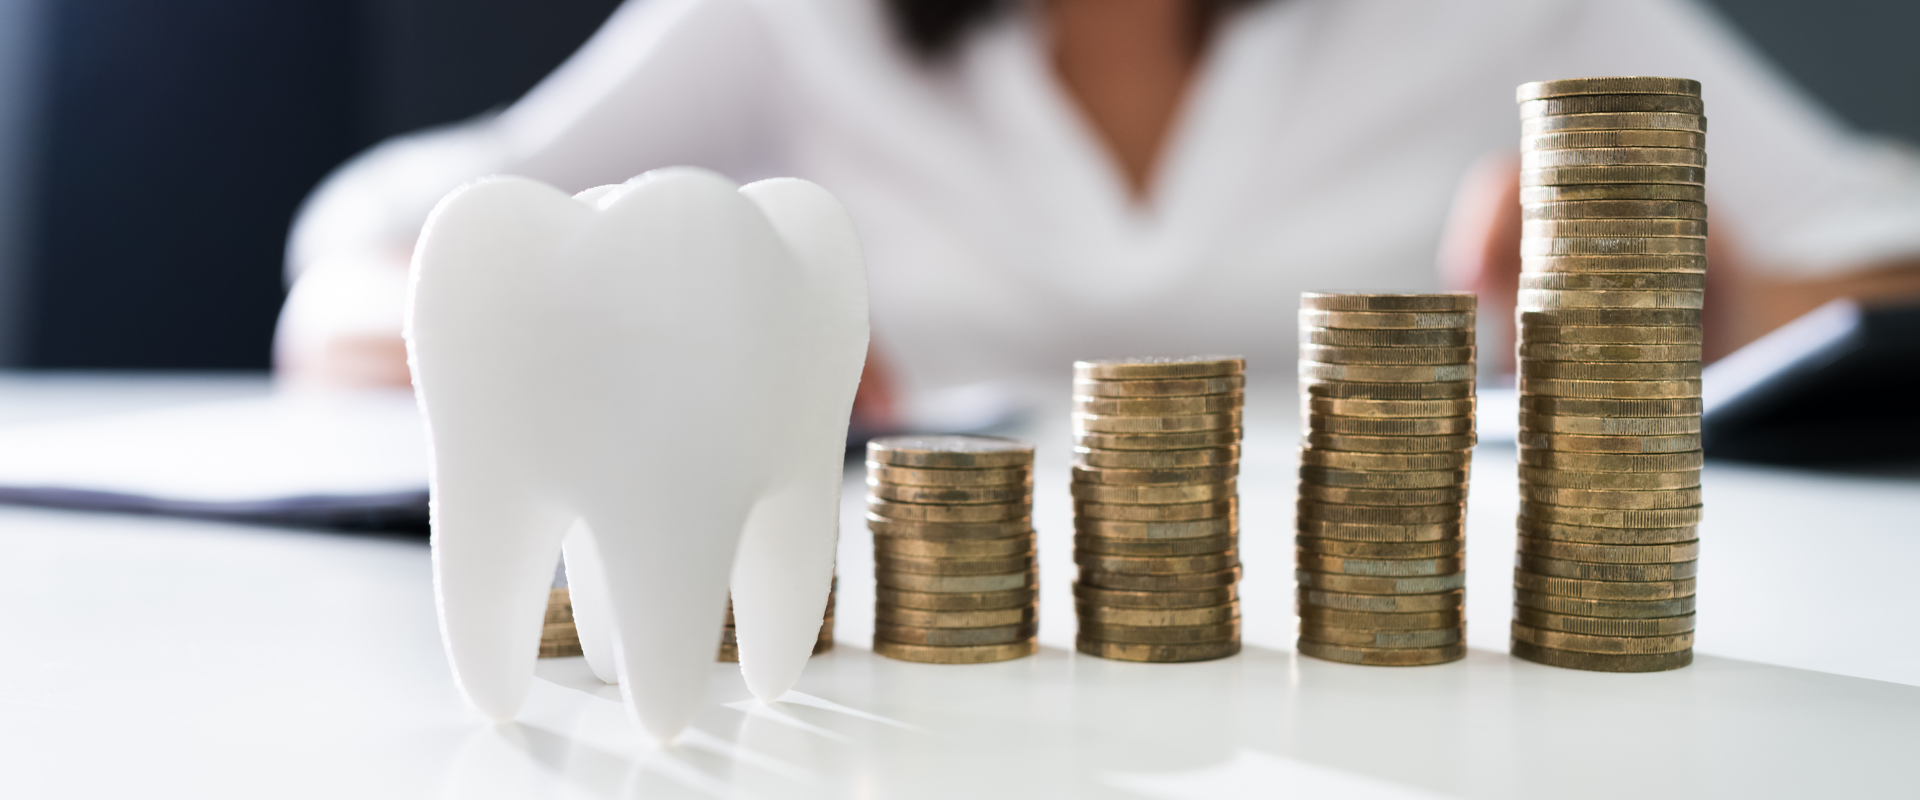 eAssist dental billing solutions for your accounts receivable issues